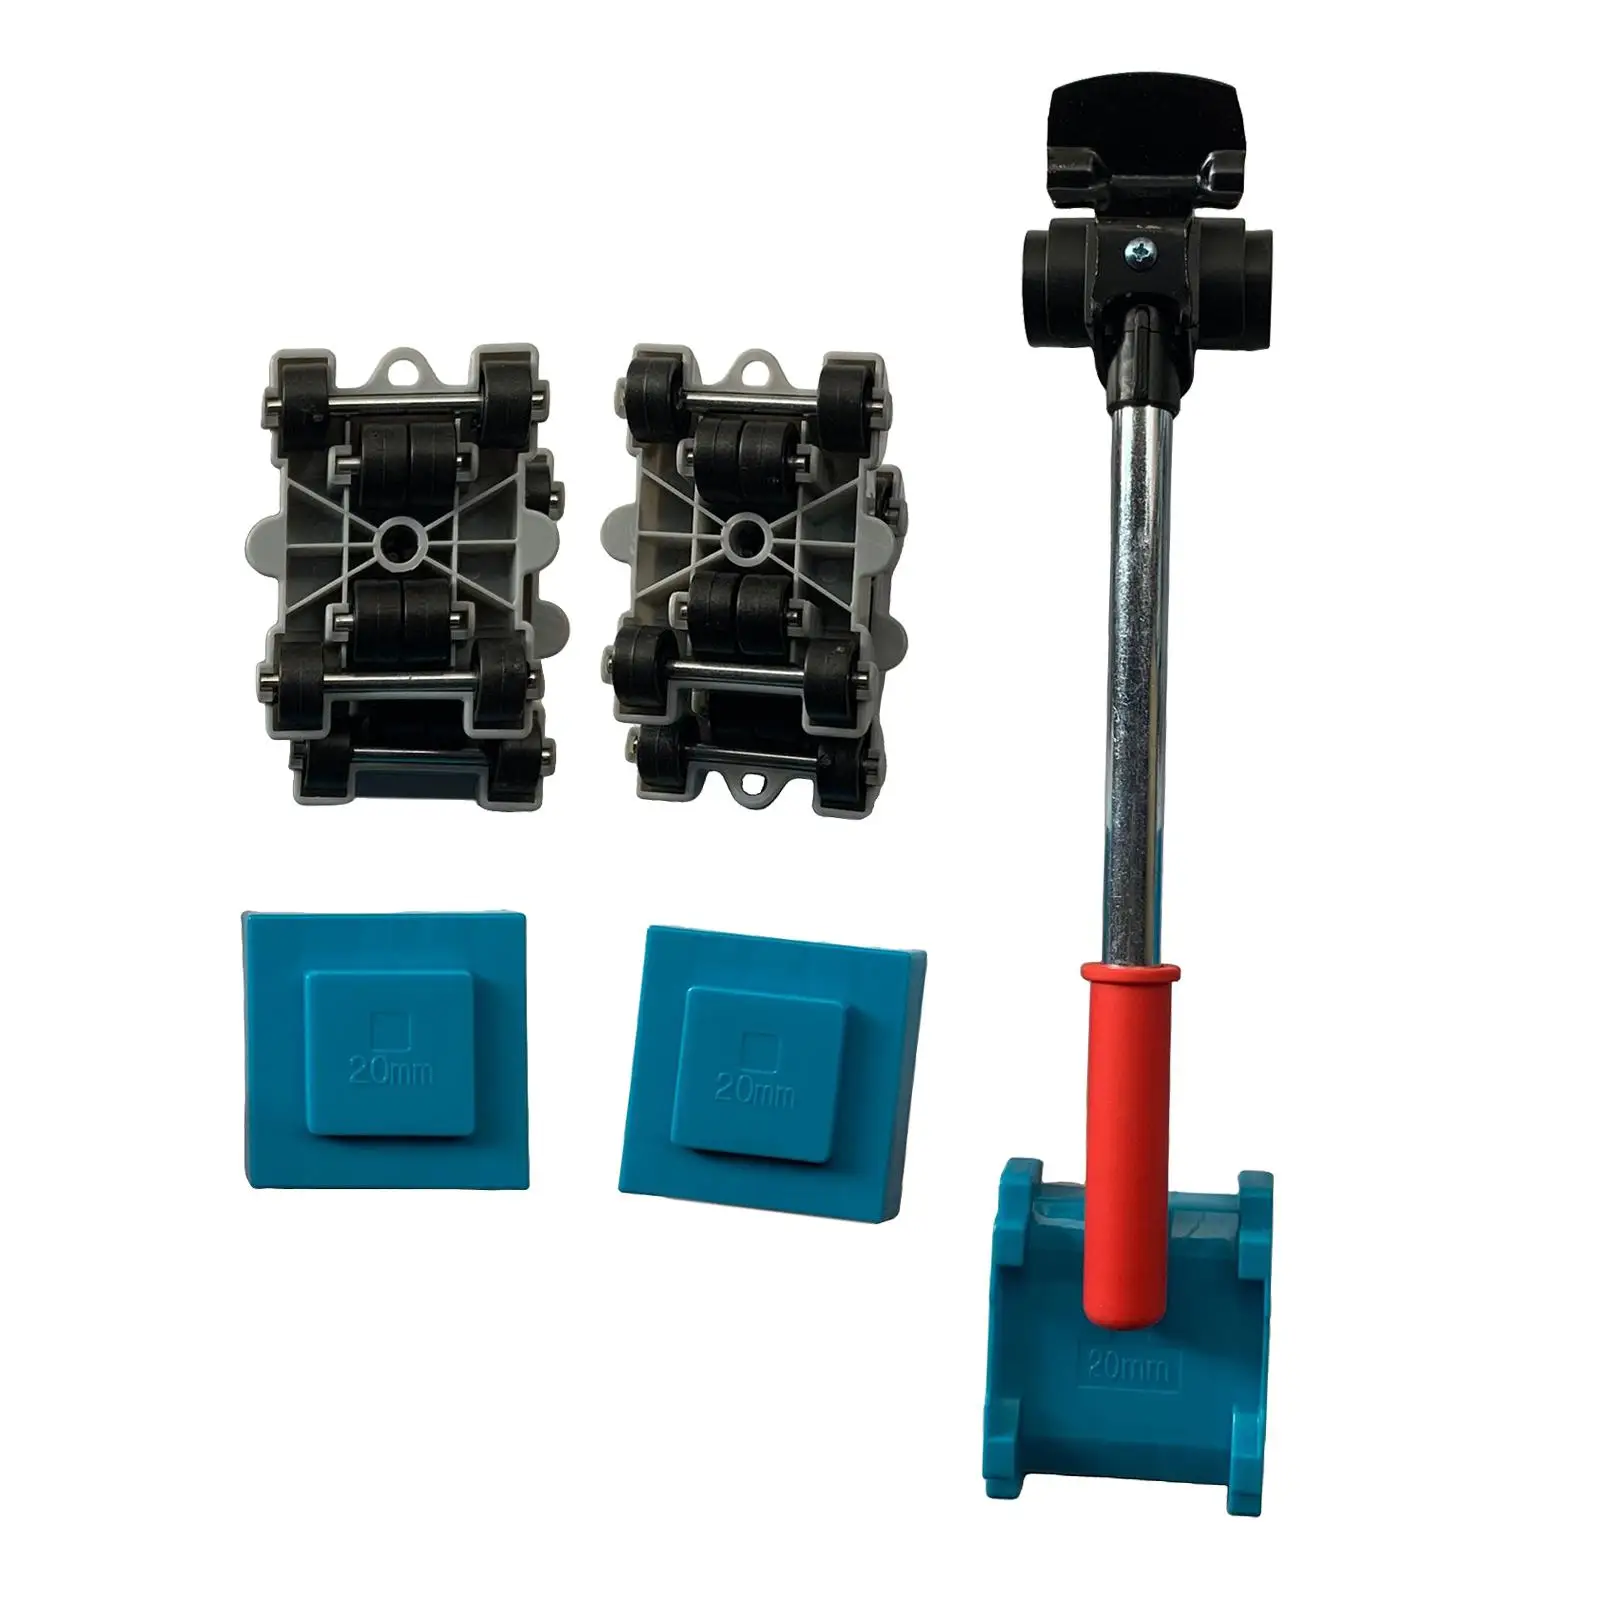 Portable Furniture Lifter Multifunctional Roller tools Moving and Lifting System Heavy Duty for Moving Sofas Wardrobes